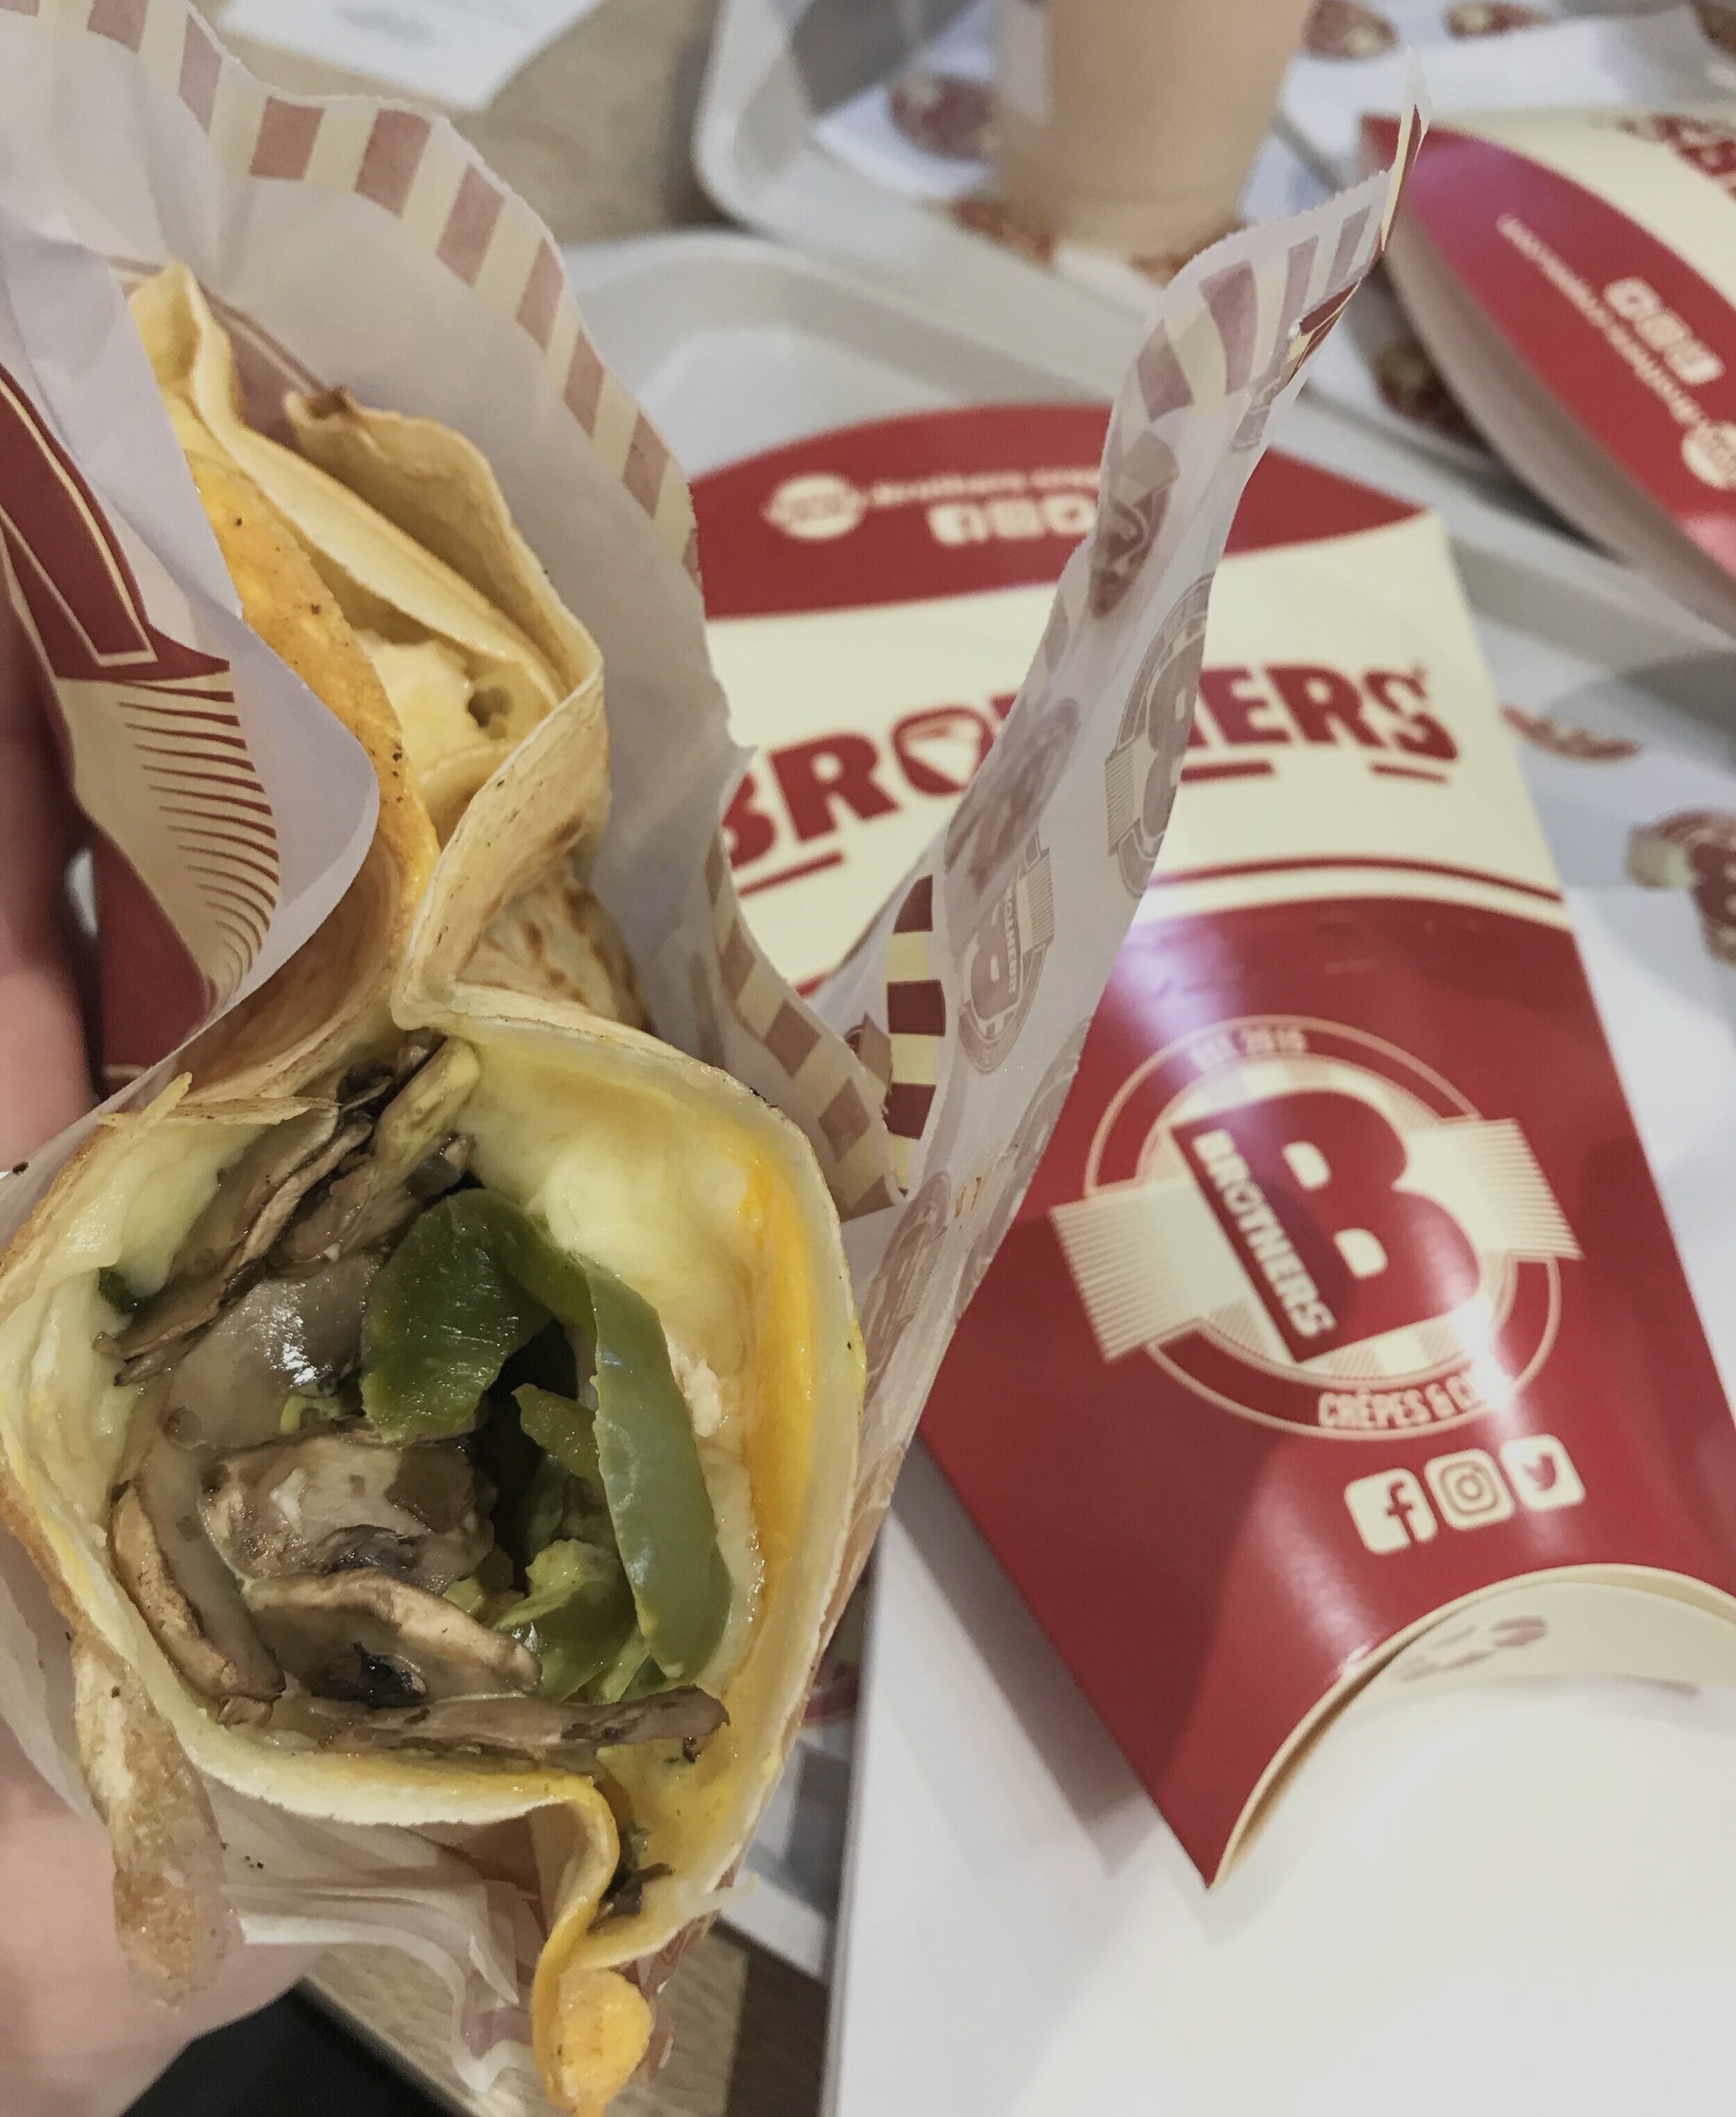 Curry chicken, green peppers, mushrooms, cheese all wrapped up in a crepe. Yes Please. Hands down the best food I ate while in Paris. 